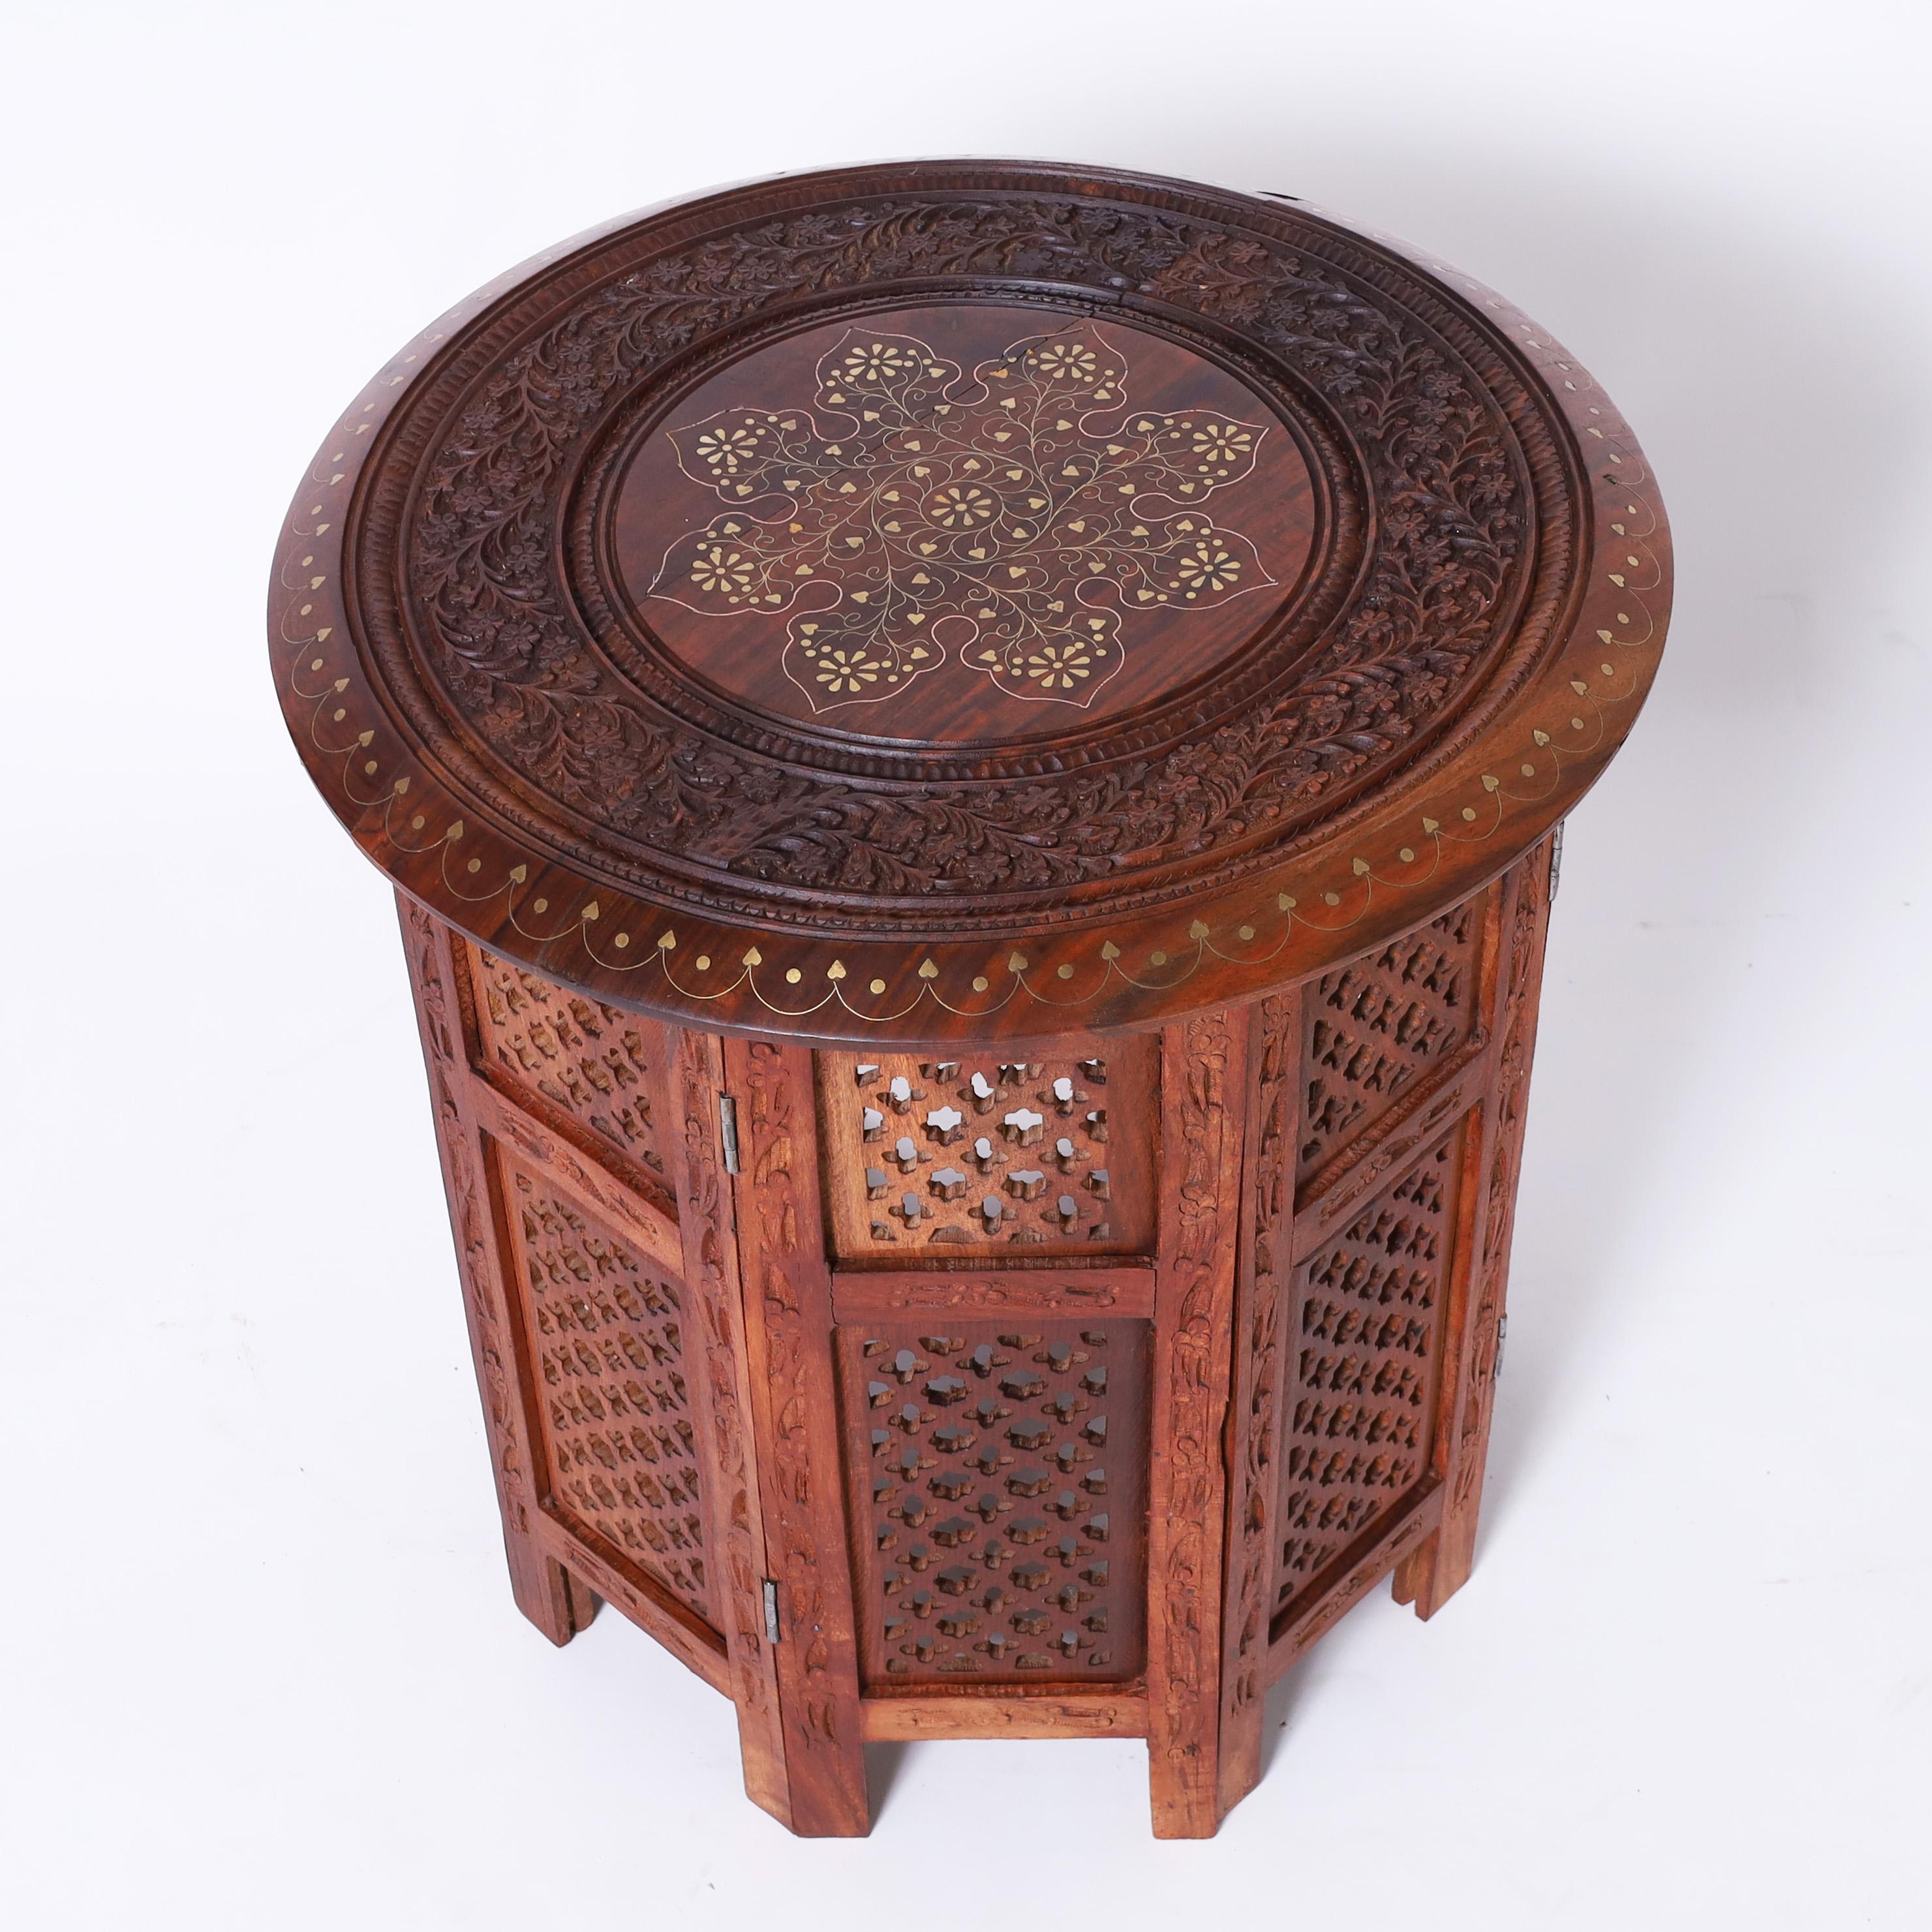 Standout pair of vintage Anglo Indian stands crafted in teak wood having round tops with brass inlays and floral carvings over an octagon form base with open fretwork.